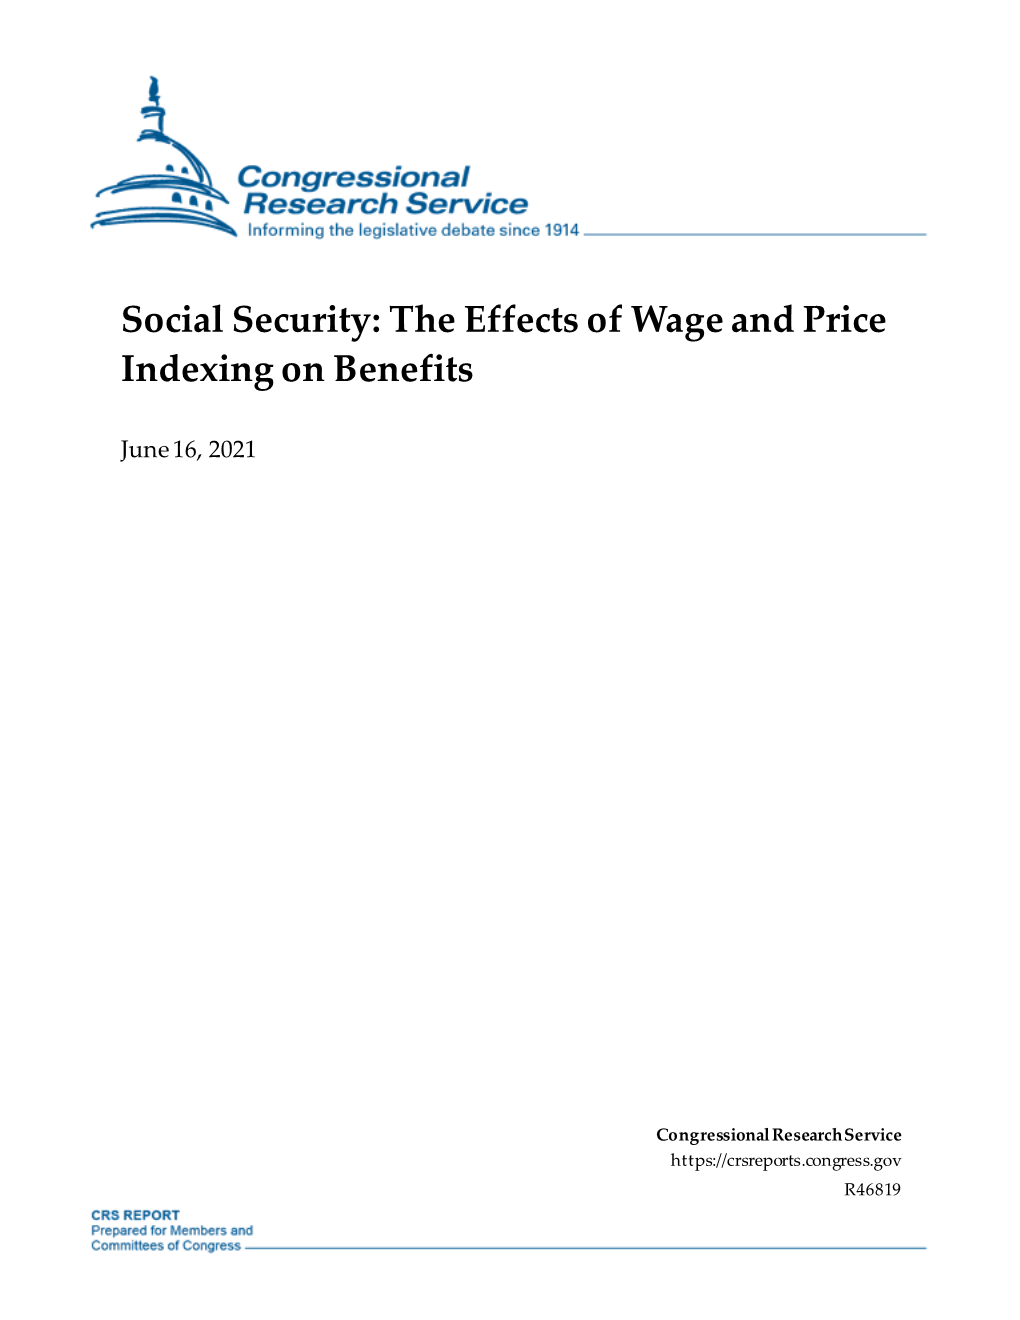 Social Security: the Effects of Wage and Price Indexing on Benefits